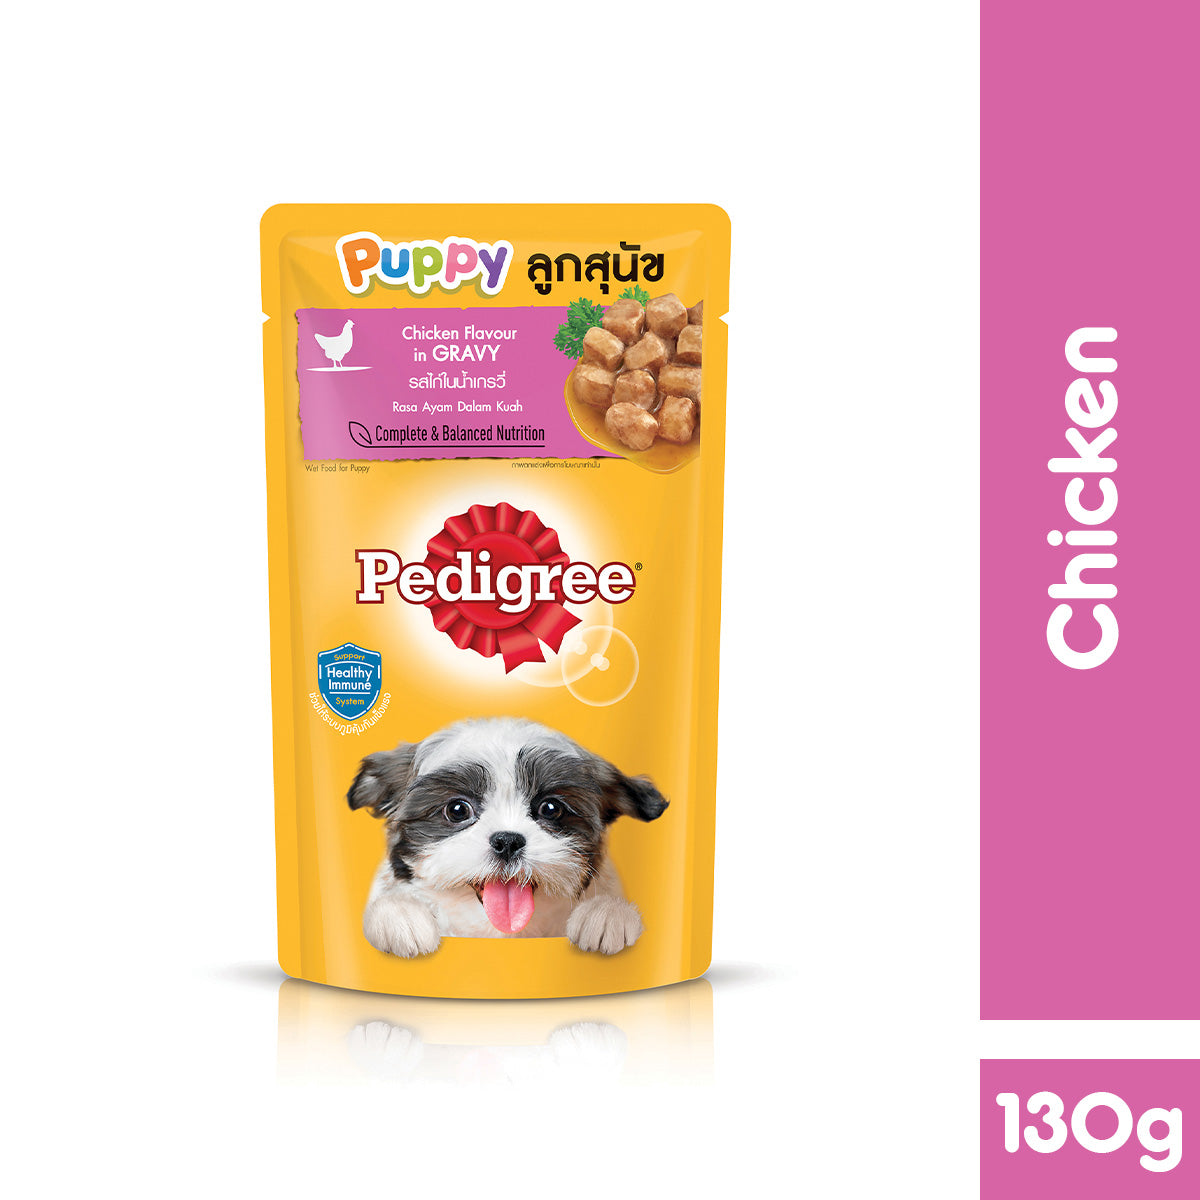 is pedigree puppy chow good for puppies